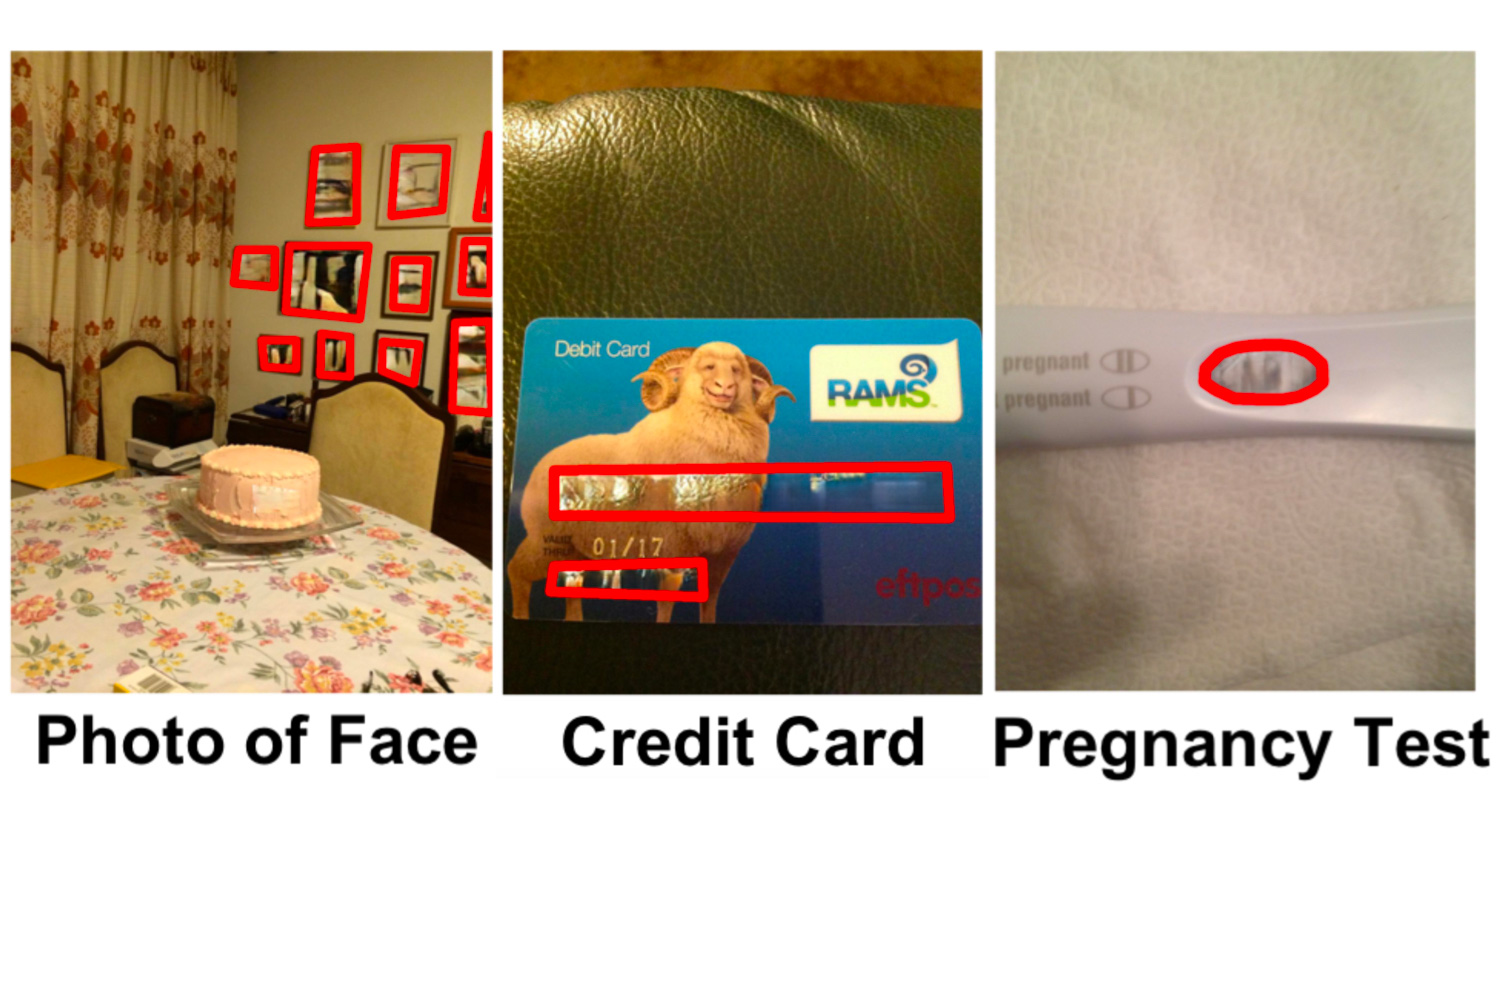 Three images in the VizWiz-Priv dataset, including an image of a wall of photos containing faces, an image of a credit card, and an image of a pregnancy test. The private information regions in the images are highlighted and inpainted.